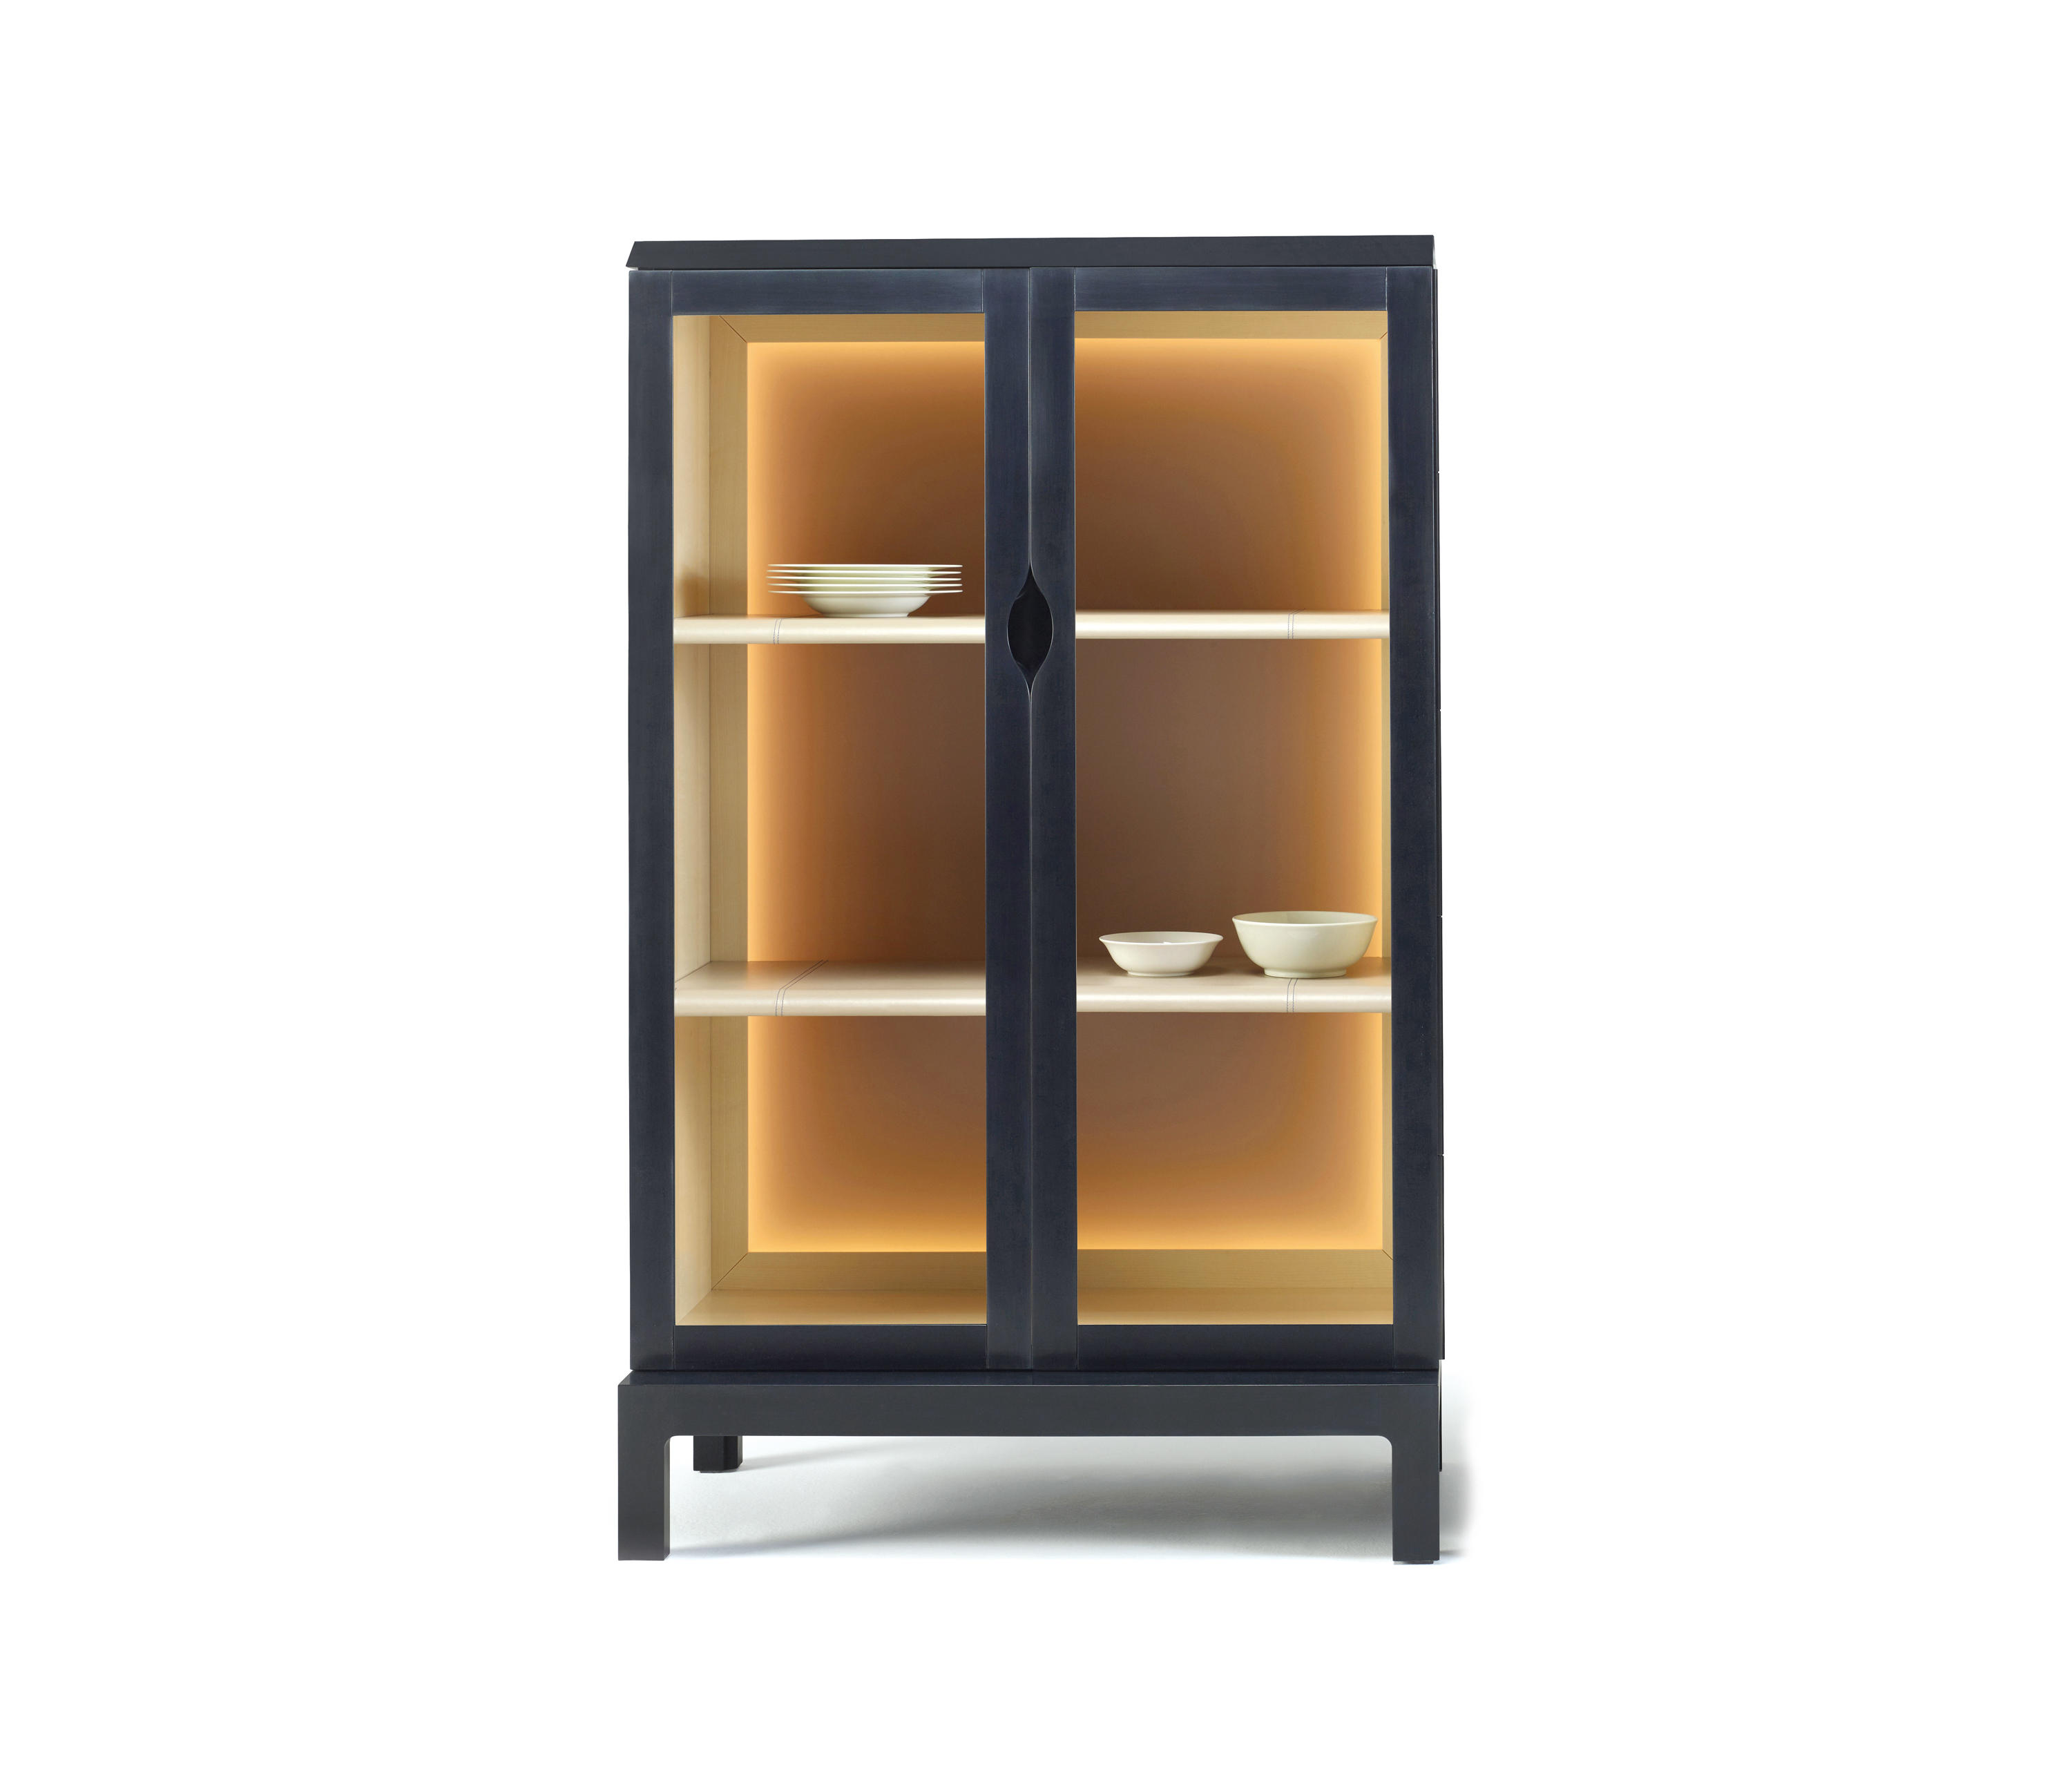 Laos Cabinet Display Cabinets From Promemoria Architonic